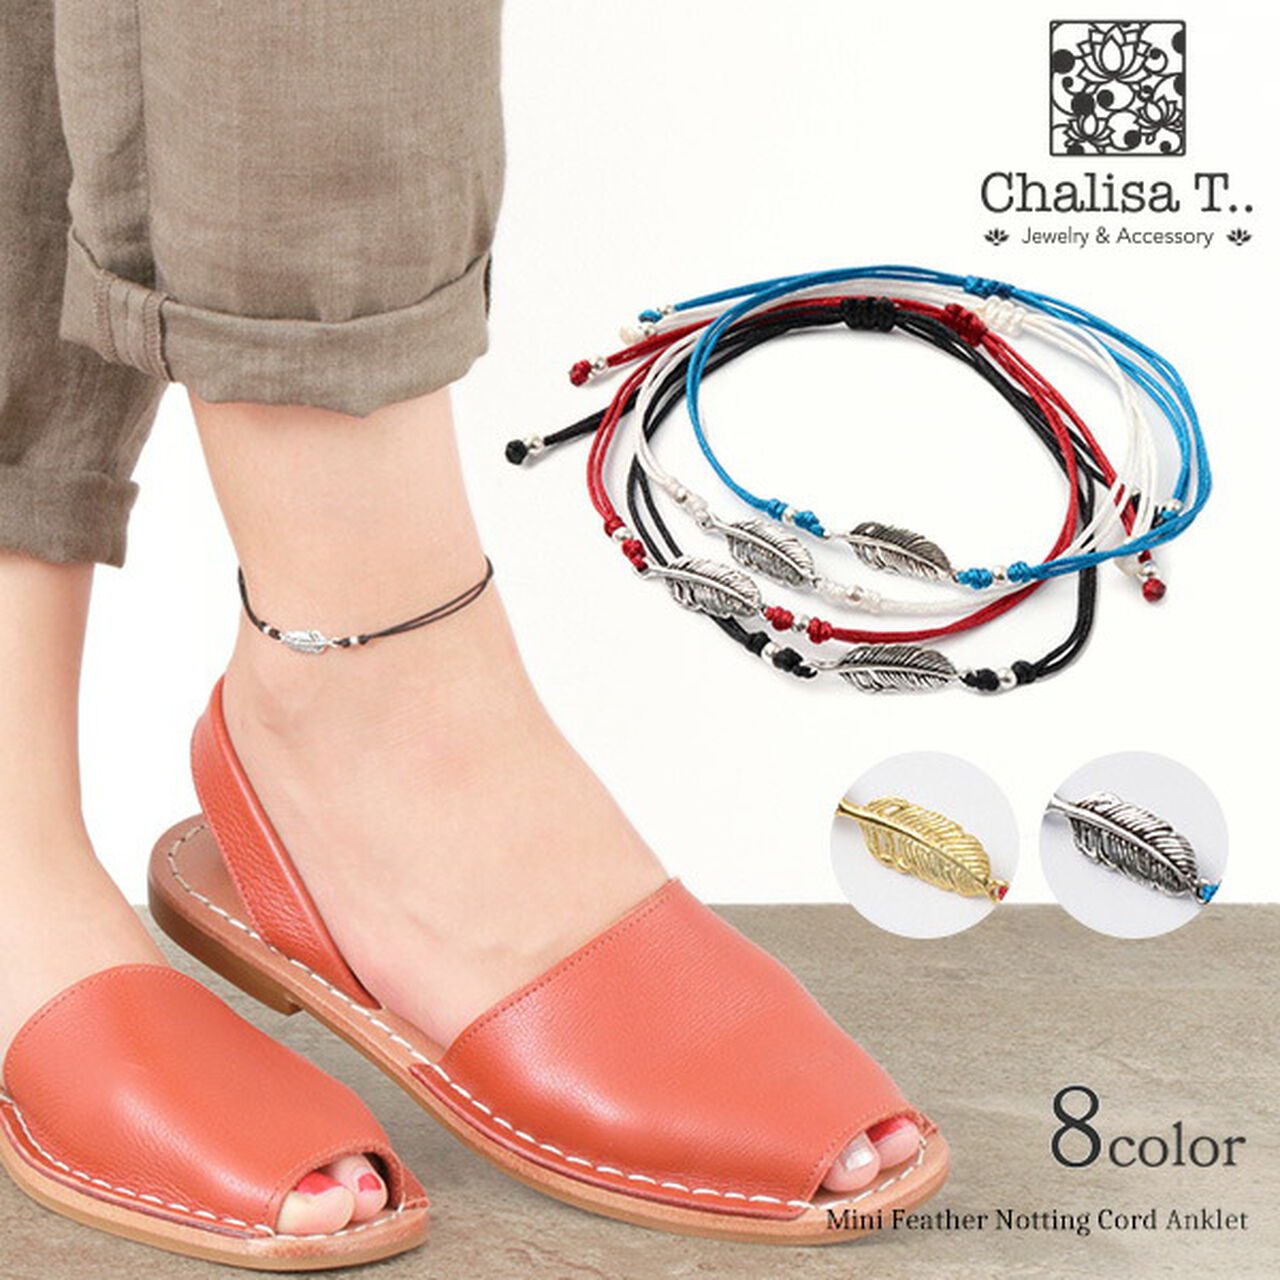 Mini Feather Notting Cord Anklet,, large image number 0